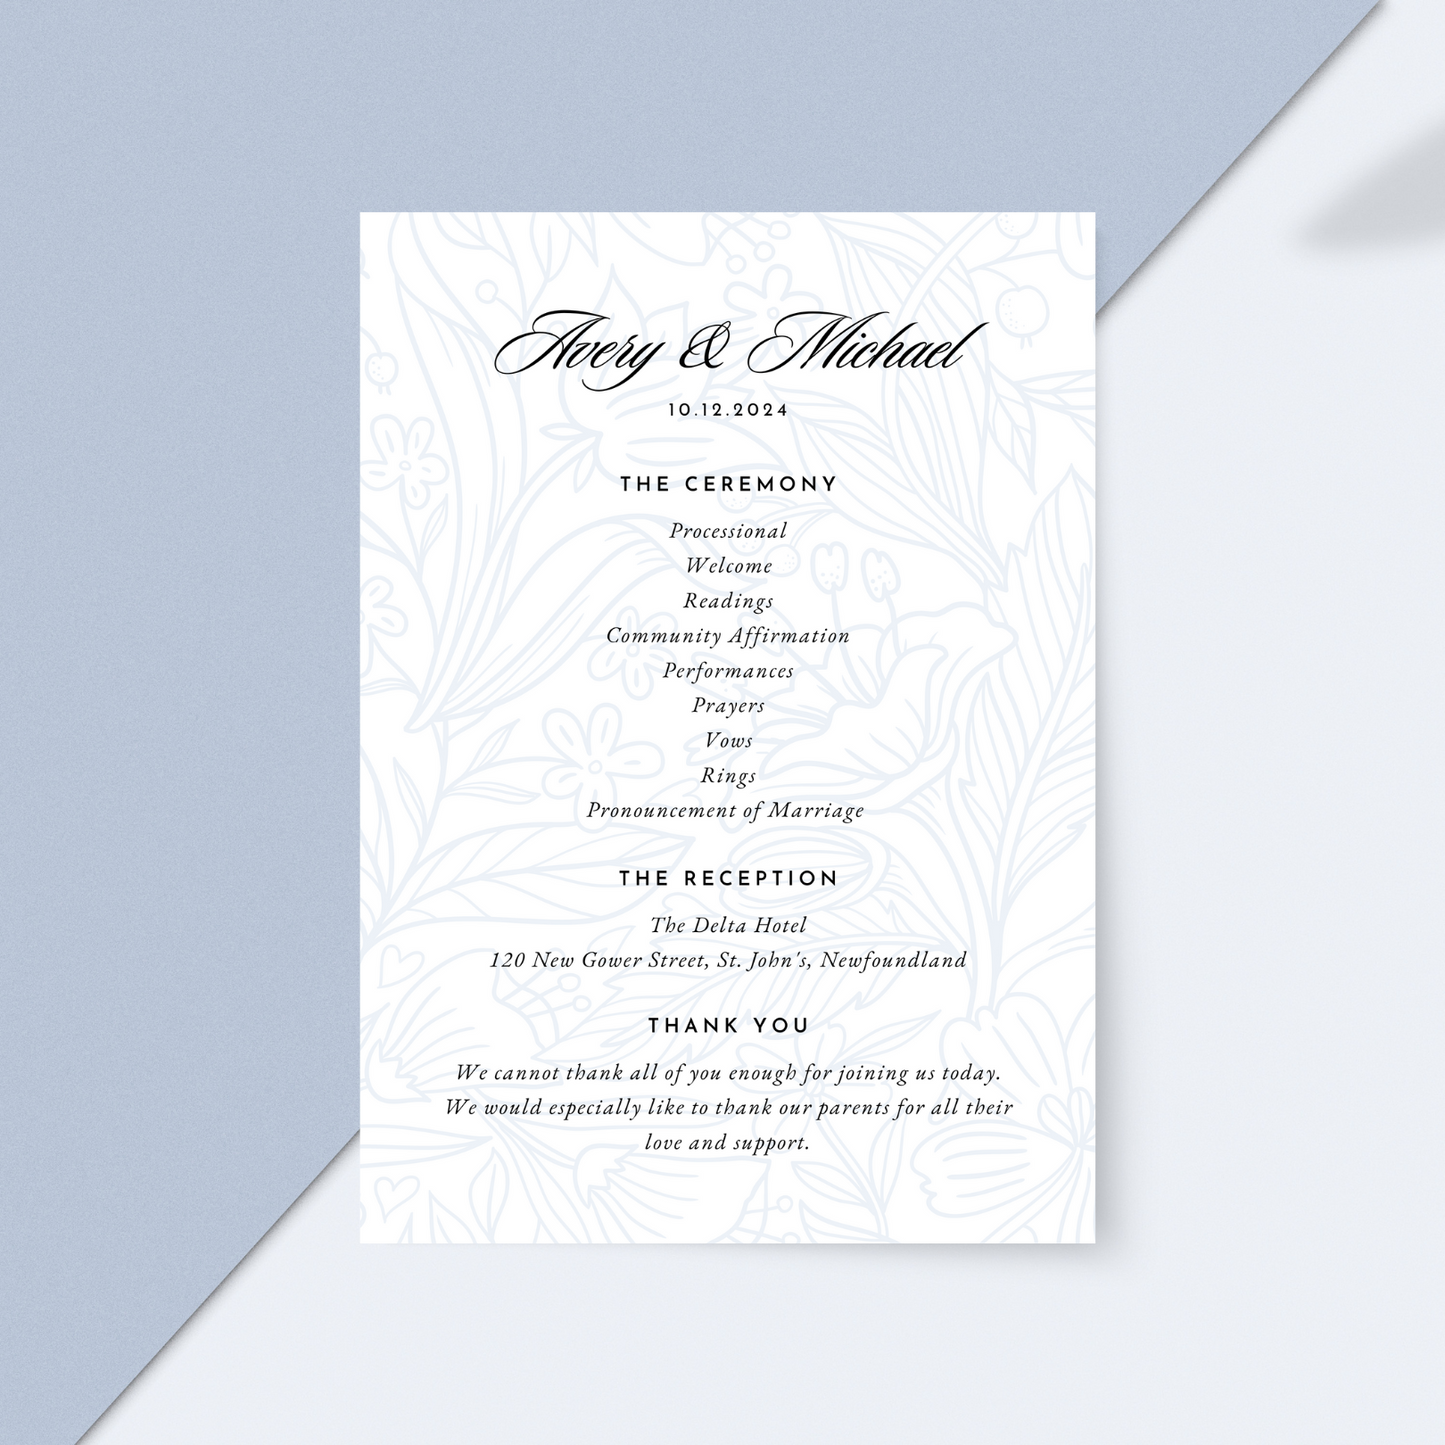 A wedding program with light blue florals in the background lays against a dual blue toned backdrop.